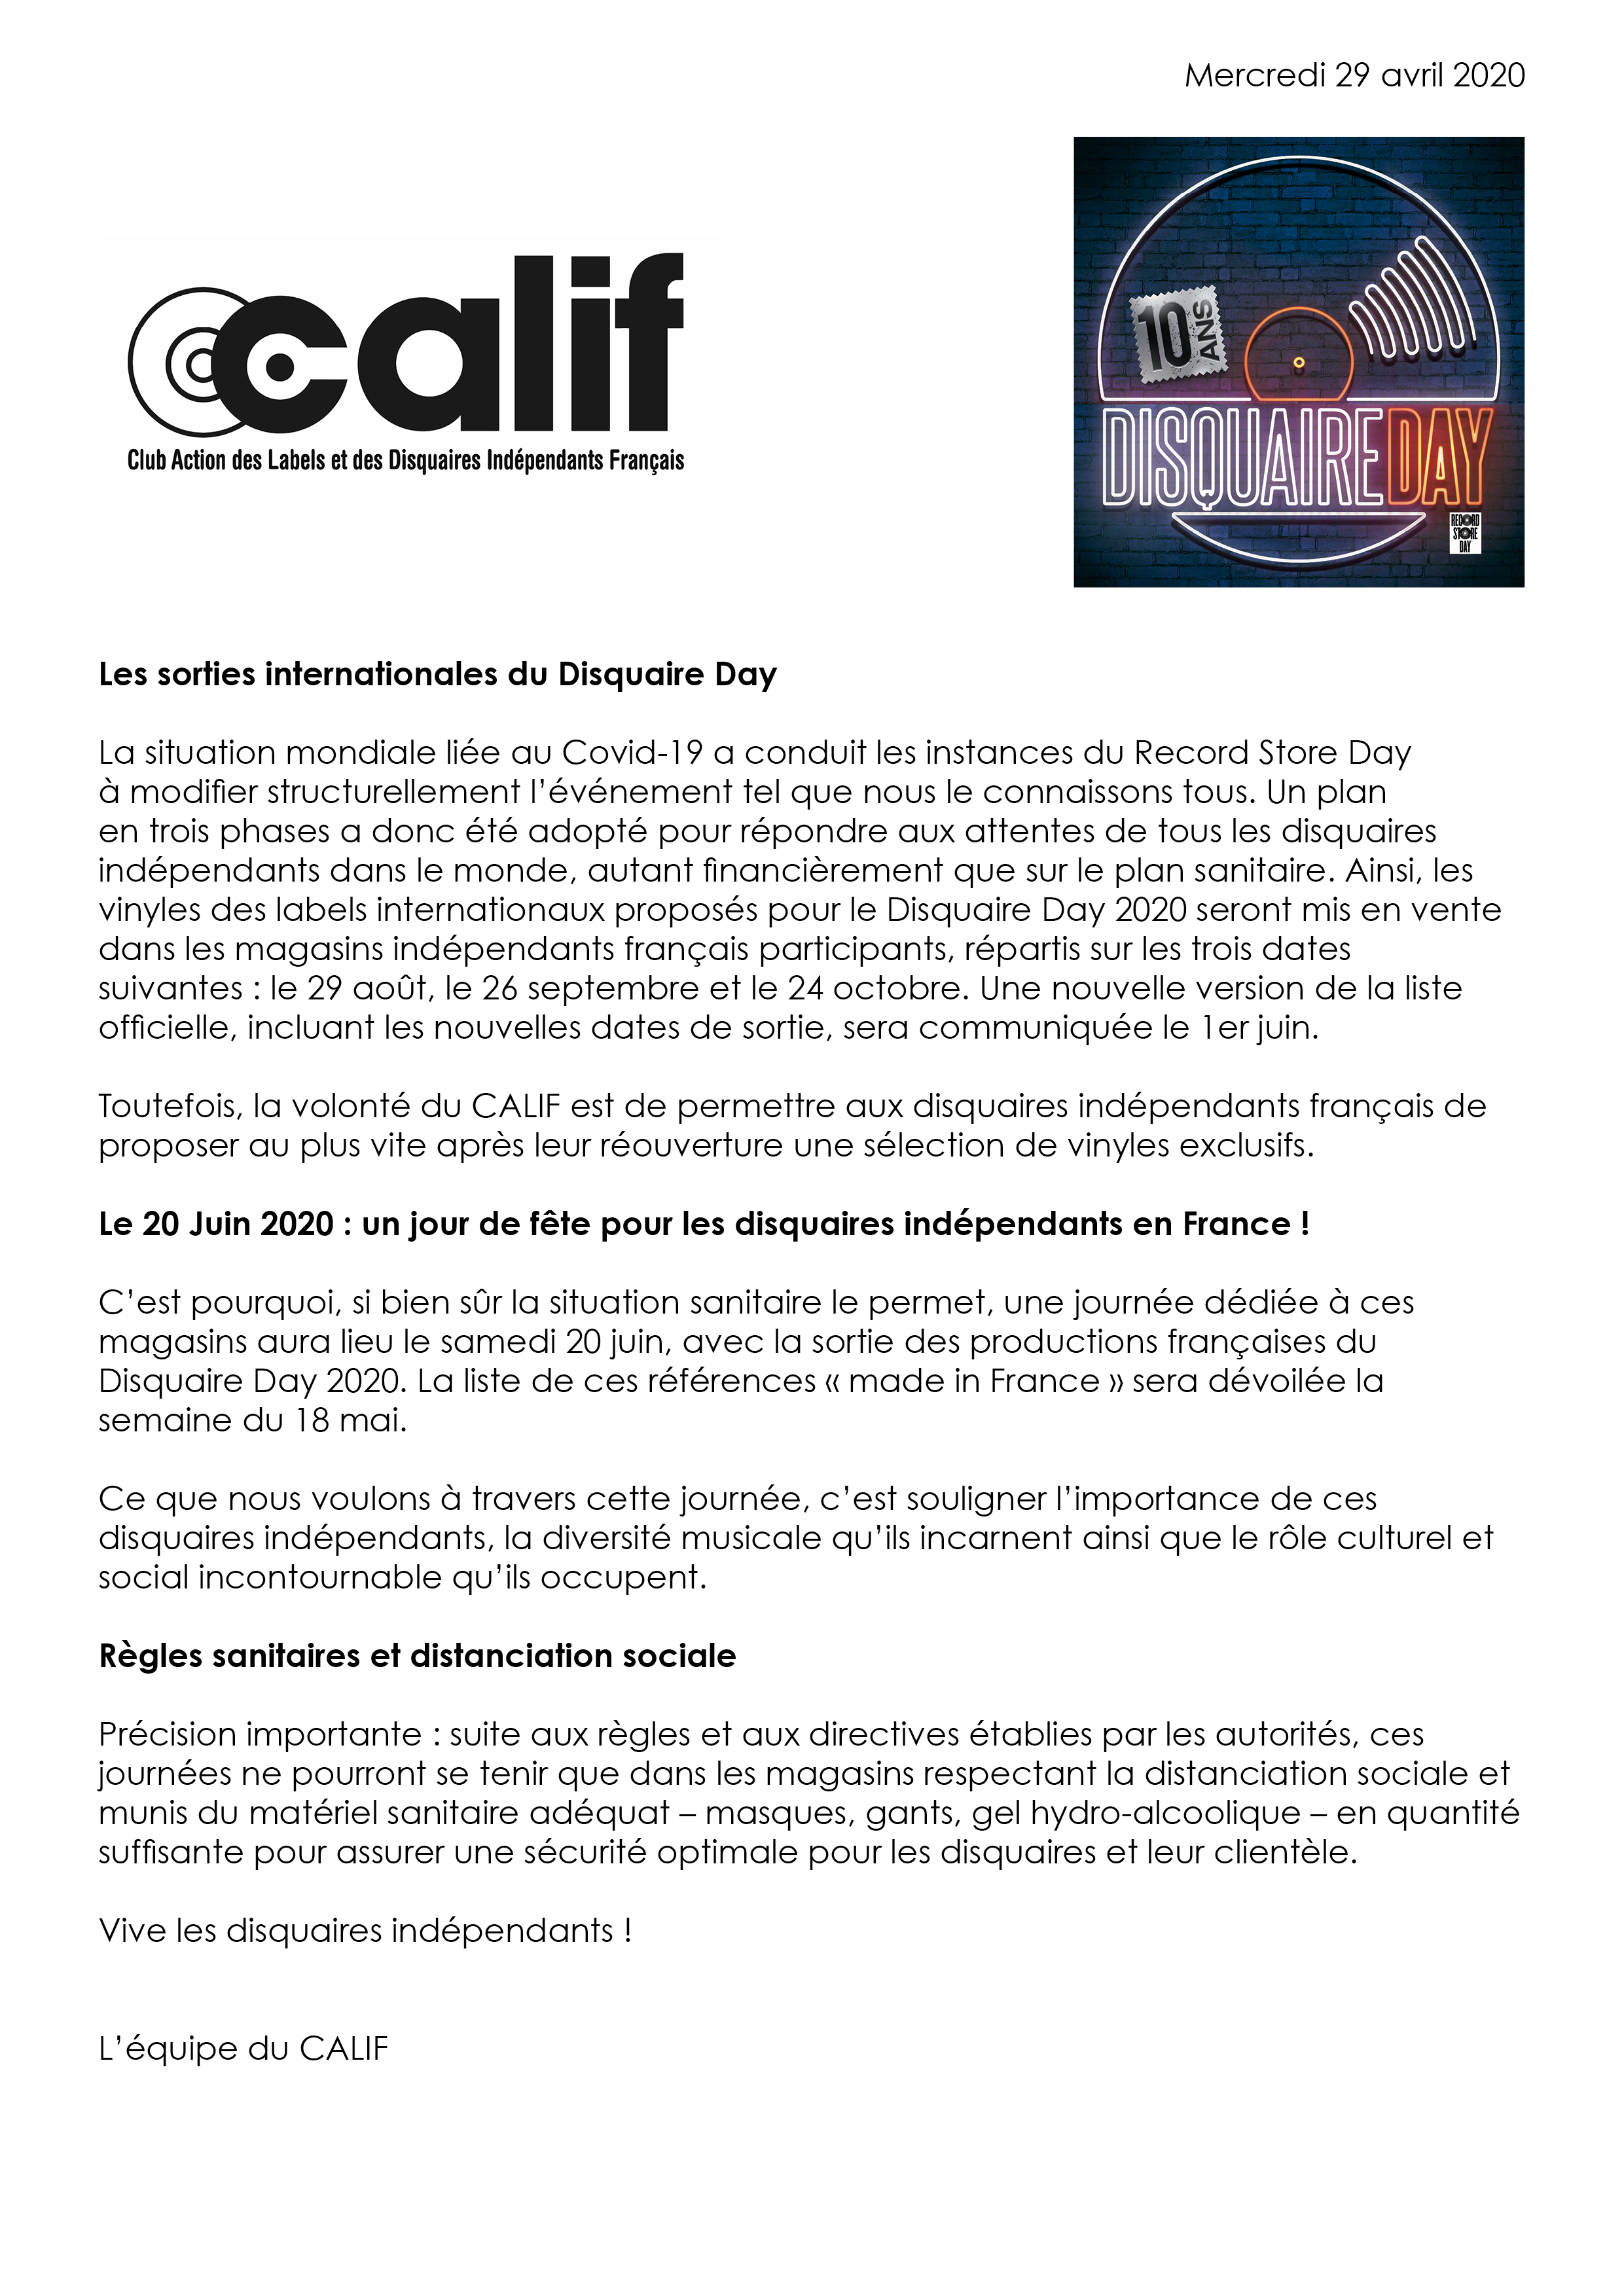 News – Disquaire Day – Record Store Day 2020